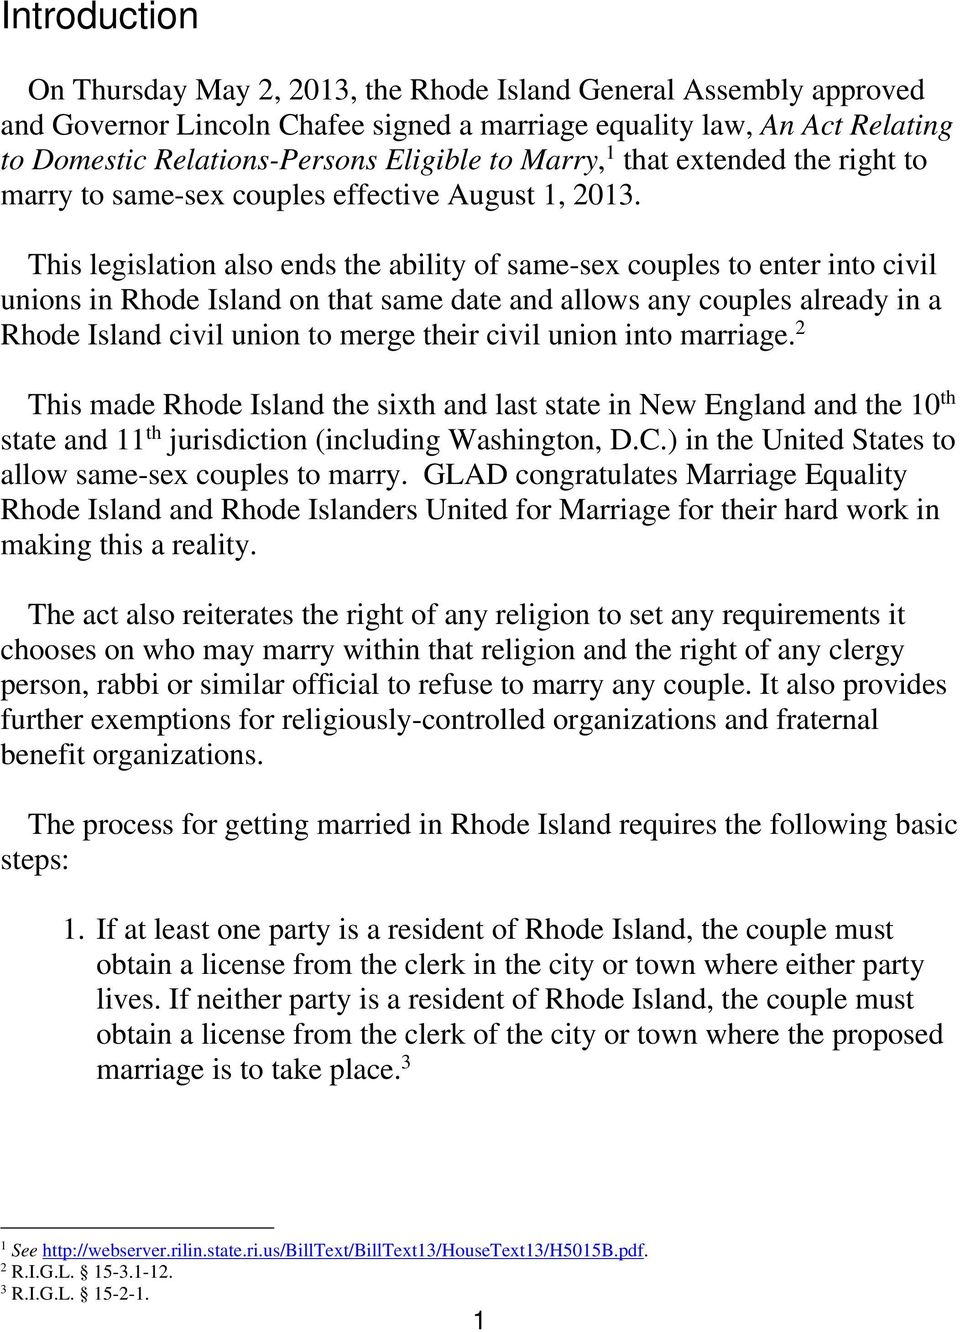 This legislation also ends the ability of same-sex couples to enter into civil unions in Rhode Island on that same date and allows any couples already in a Rhode Island civil union to merge their